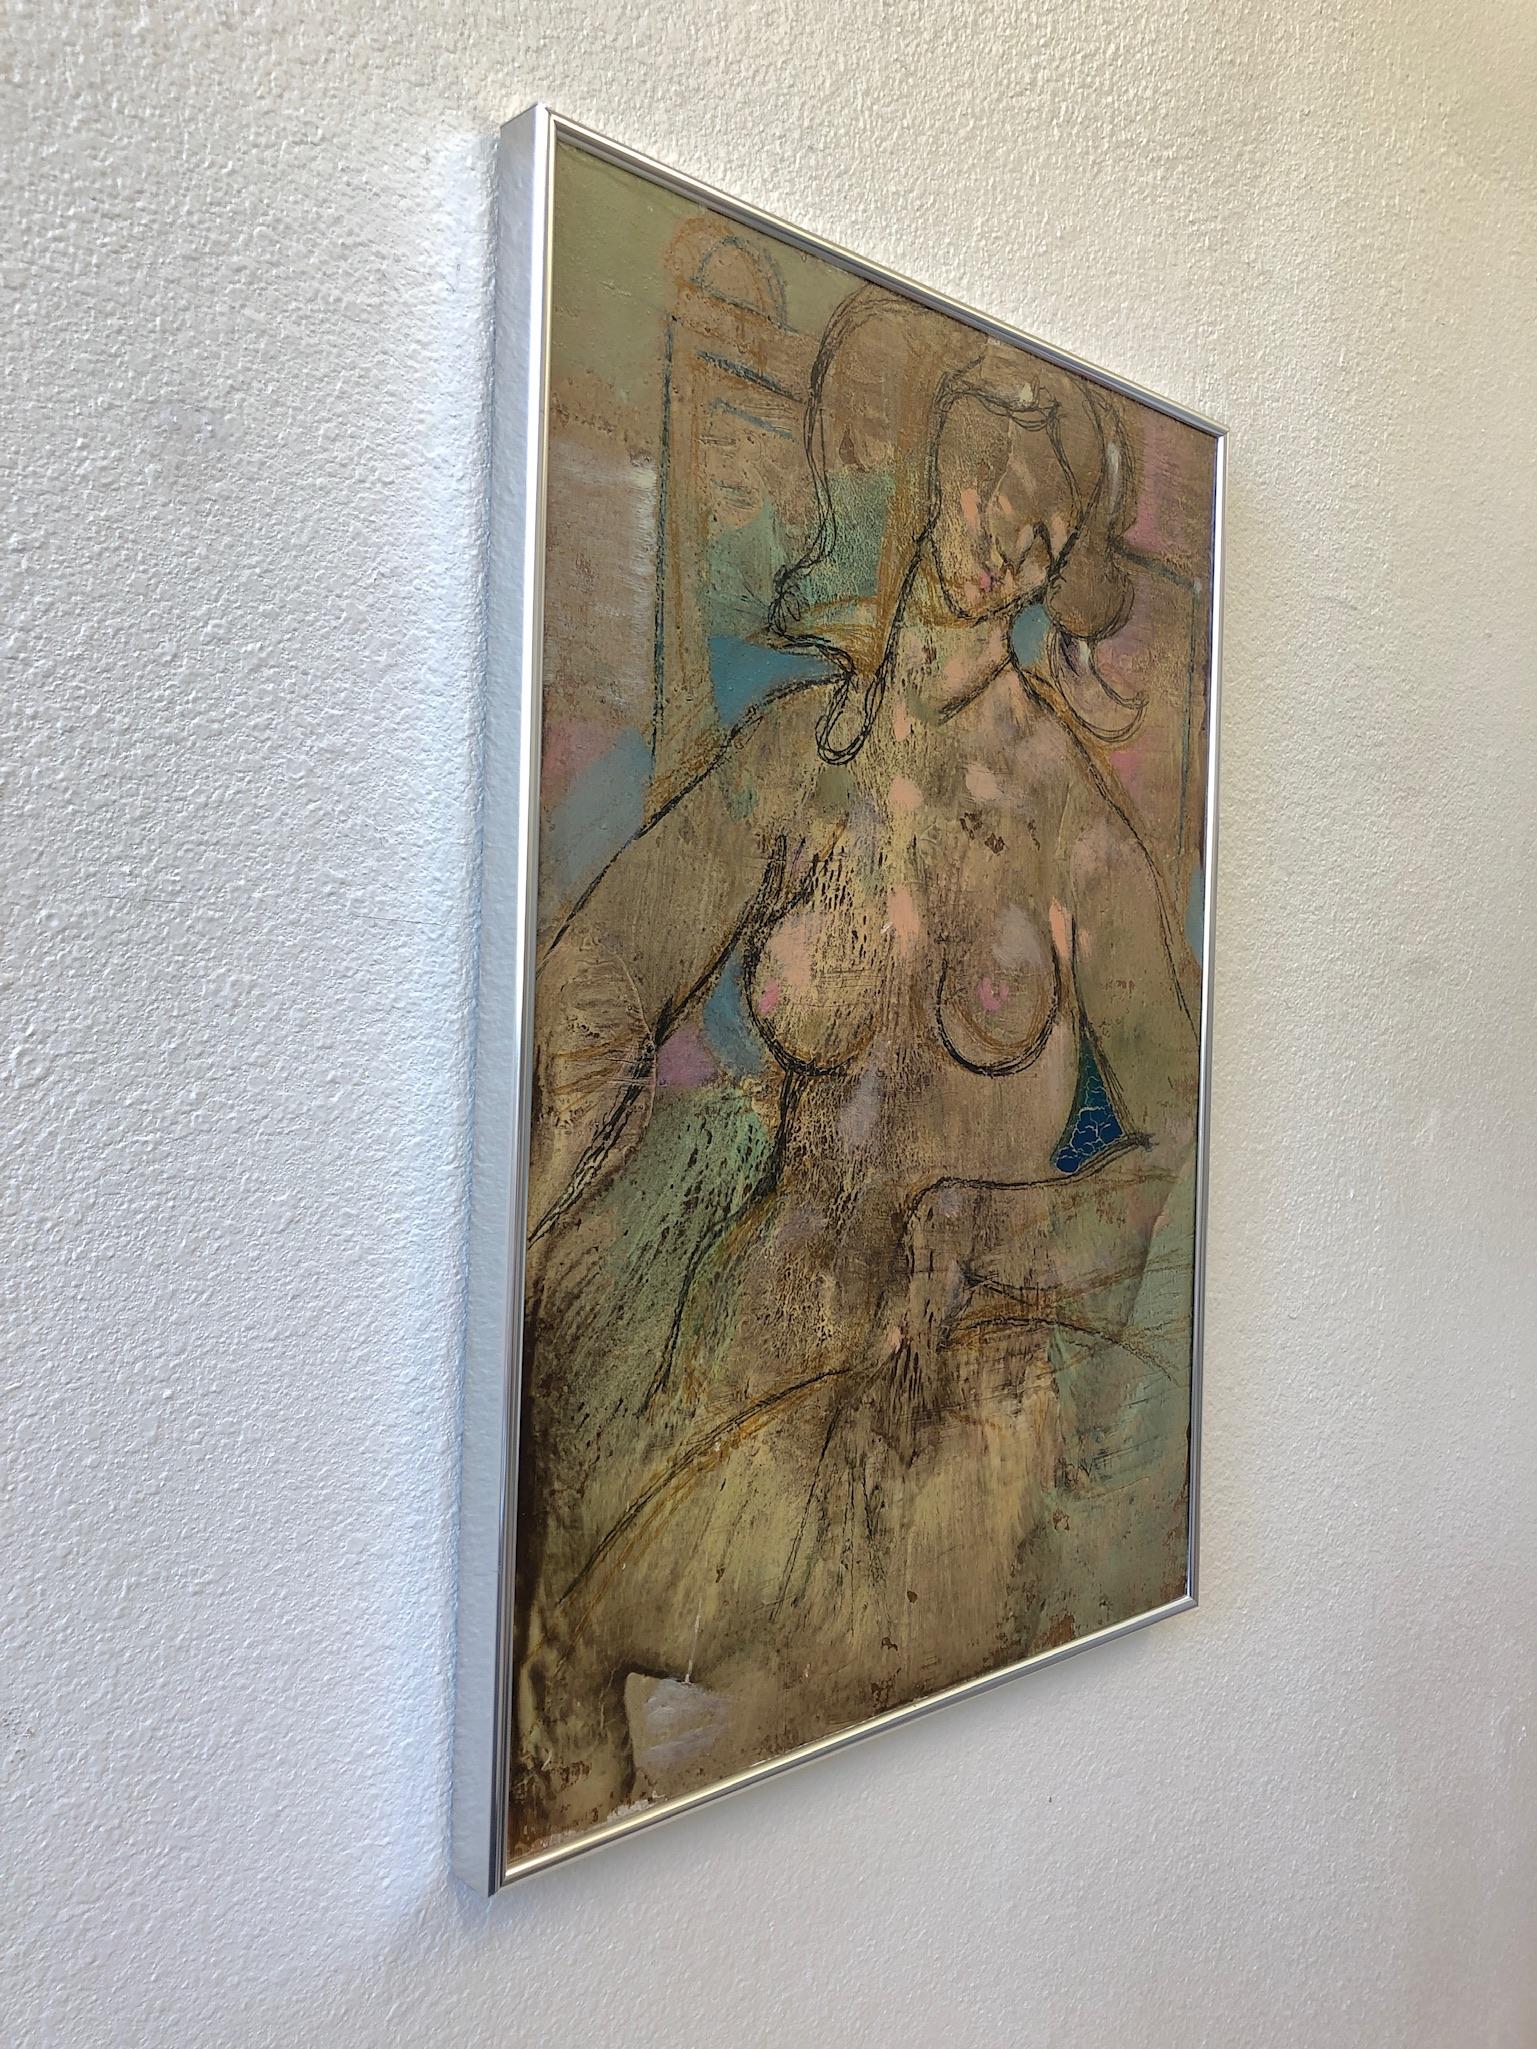 1961 abstract female nude oil and graphite painting on board by listed Italian artists Lazzaro Donati.
The painting title “Sitting Naked in Pink” is signed Donati on the front and signed and dated in the back. Original aluminum frame.
Dimension: